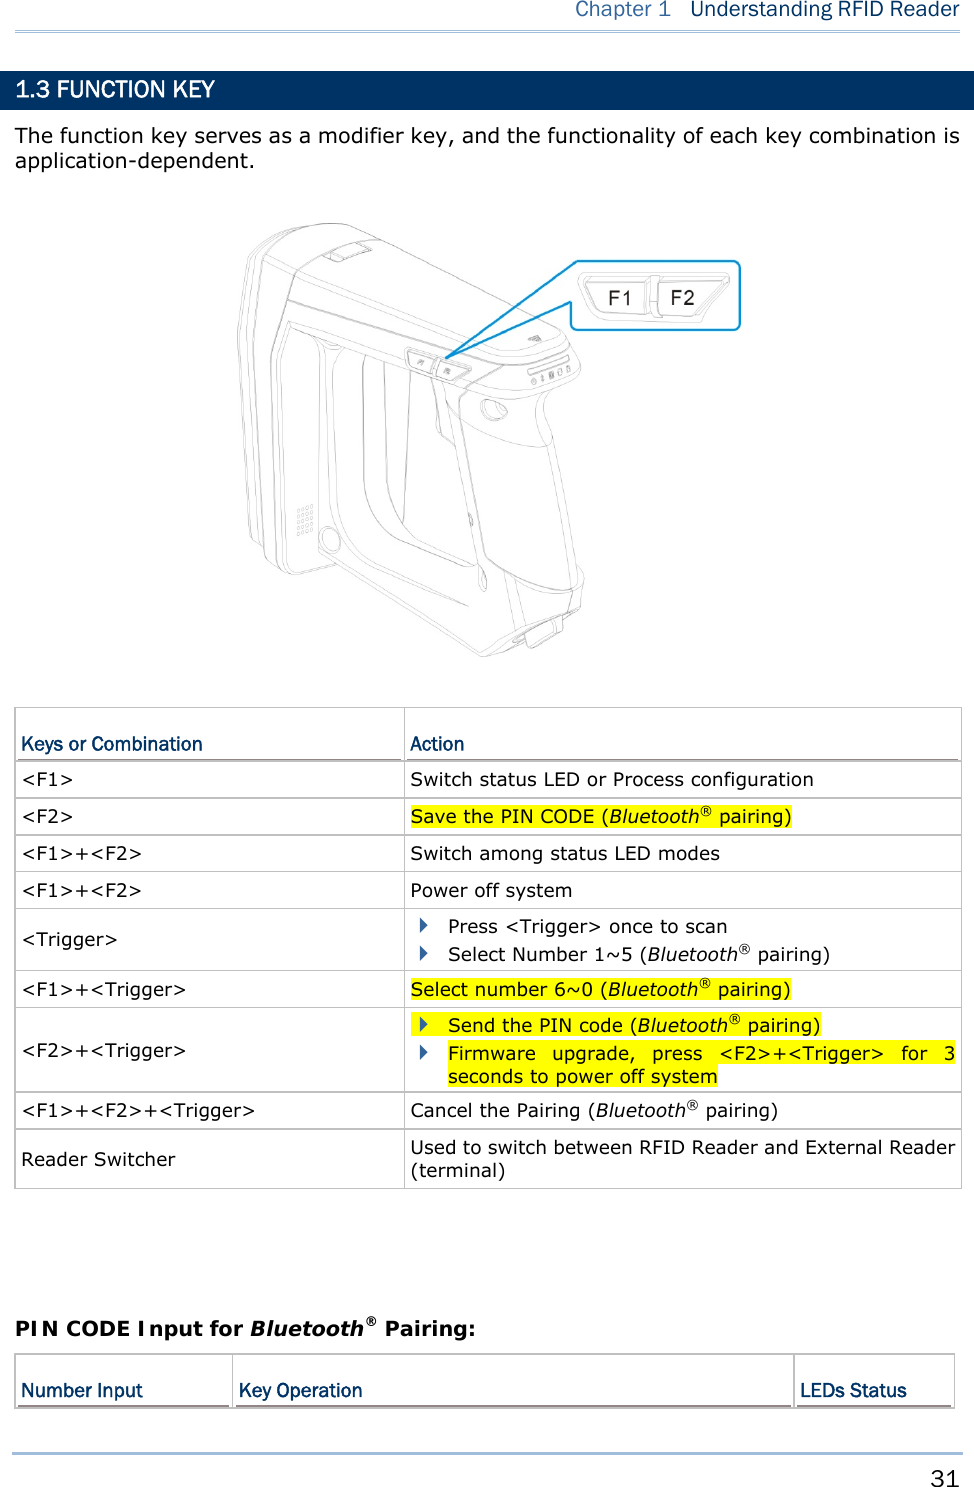     31   Chapter 1   Understanding RFID Reader 1.3 FUNCTION KEY The function key serves as a modifier key, and the functionality of each key combination is application-dependent.    Keys or Combination  Action &lt;F1&gt;  Switch status LED or Process configuration   &lt;F2&gt;  Save the PIN CODE (Bluetooth® pairing) &lt;F1&gt;+&lt;F2&gt;  Switch among status LED modes   &lt;F1&gt;+&lt;F2&gt;    Power off system &lt;Trigger&gt;   Press &lt;Trigger&gt; once to scan  Select Number 1~5 (Bluetooth® pairing) &lt;F1&gt;+&lt;Trigger&gt;  Select number 6~0 (Bluetooth® pairing) &lt;F2&gt;+&lt;Trigger&gt;  Send the PIN code (Bluetooth® pairing)  Firmware upgrade, press &lt;F2&gt;+&lt;Trigger&gt; for 3 seconds to power off system &lt;F1&gt;+&lt;F2&gt;+&lt;Trigger&gt;  Cancel the Pairing (Bluetooth® pairing) Reader Switcher  Used to switch between RFID Reader and External Reader (terminal)    PIN CODE Input for Bluetooth® Pairing: Number Input  Key Operation  LEDs Status 